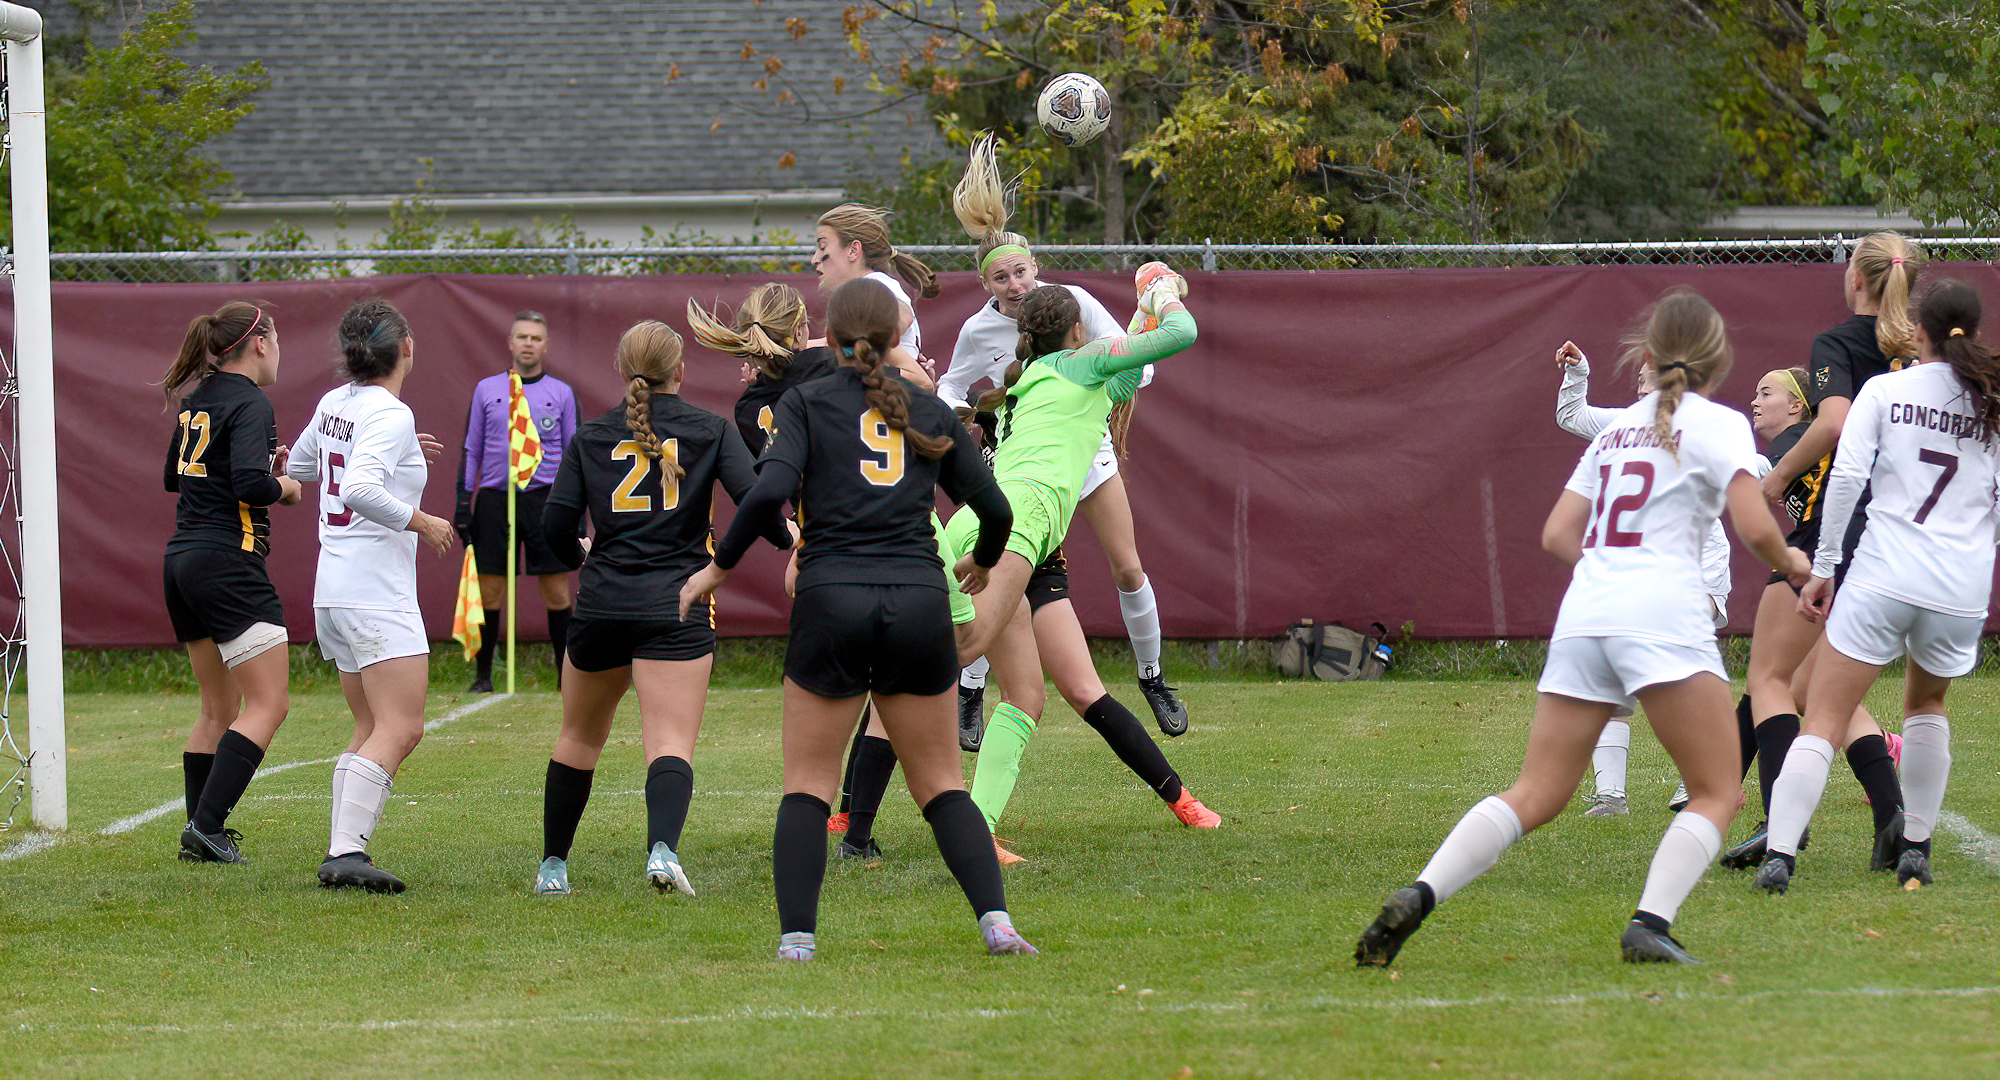 Cobber attackers go up to try and win the ball on a corner kick in their game with Gustavus.